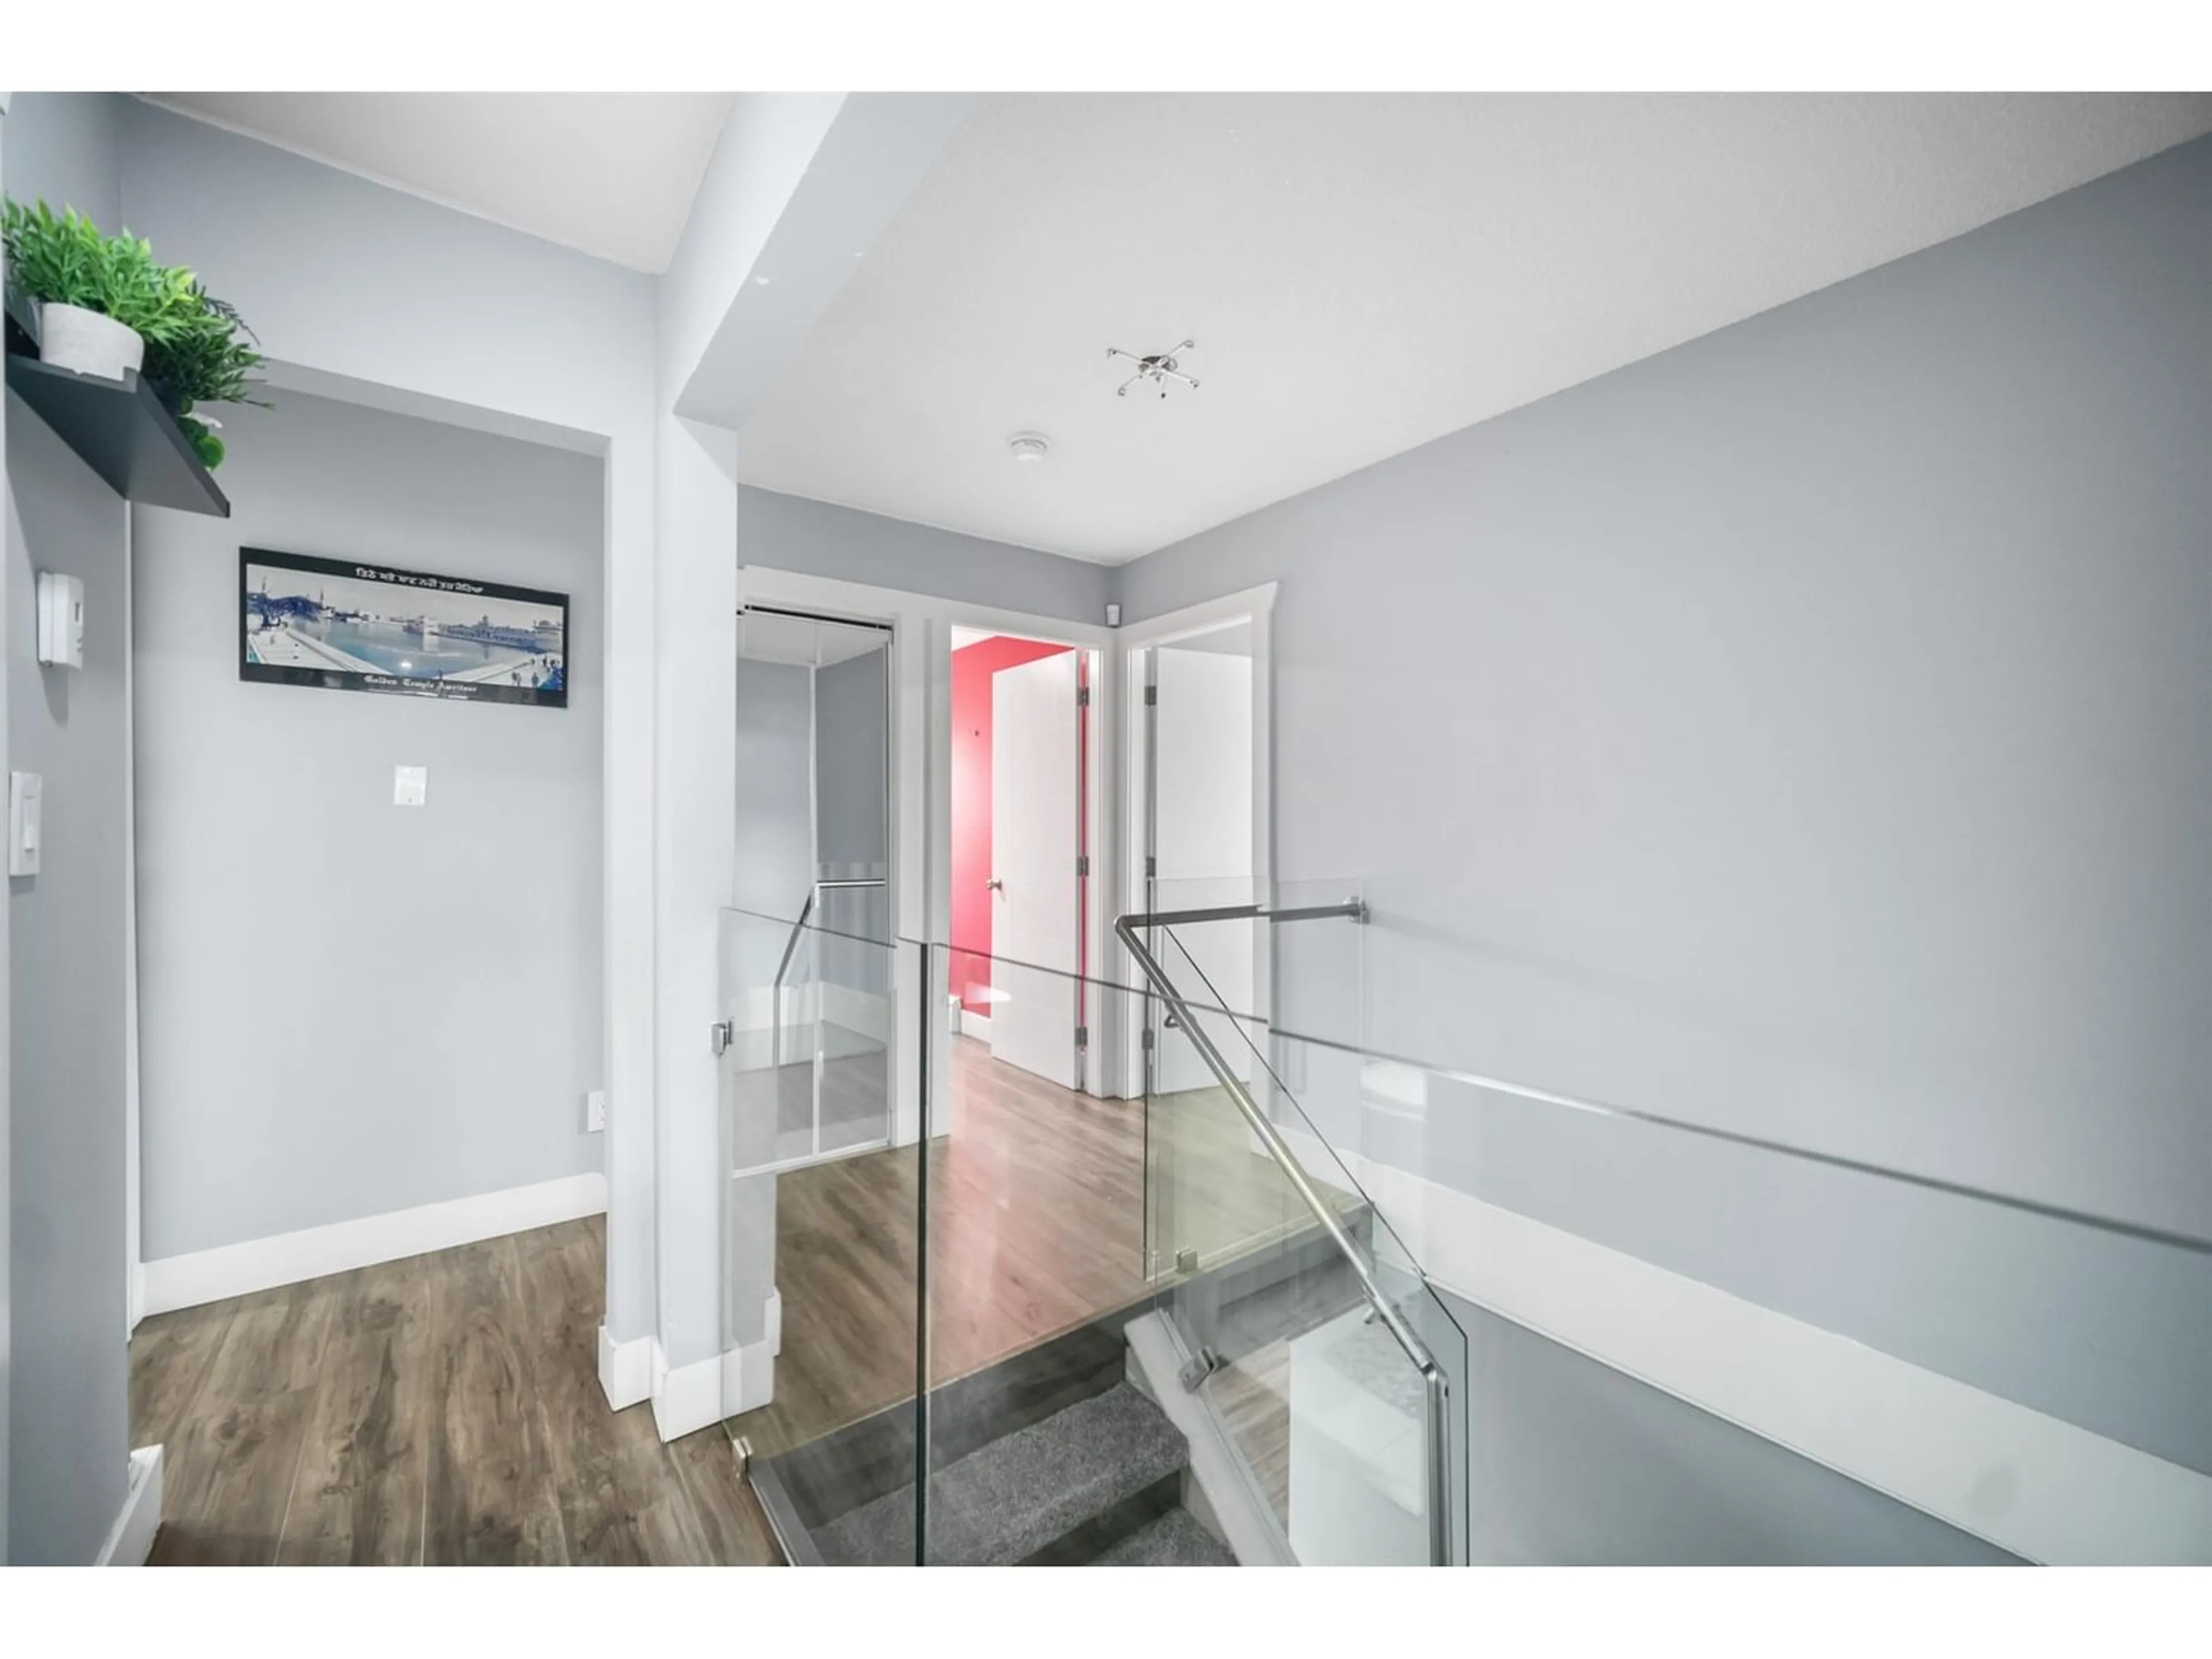 Indoor foyer for 13249 81A AVENUE, Surrey British Columbia V3W8Z2